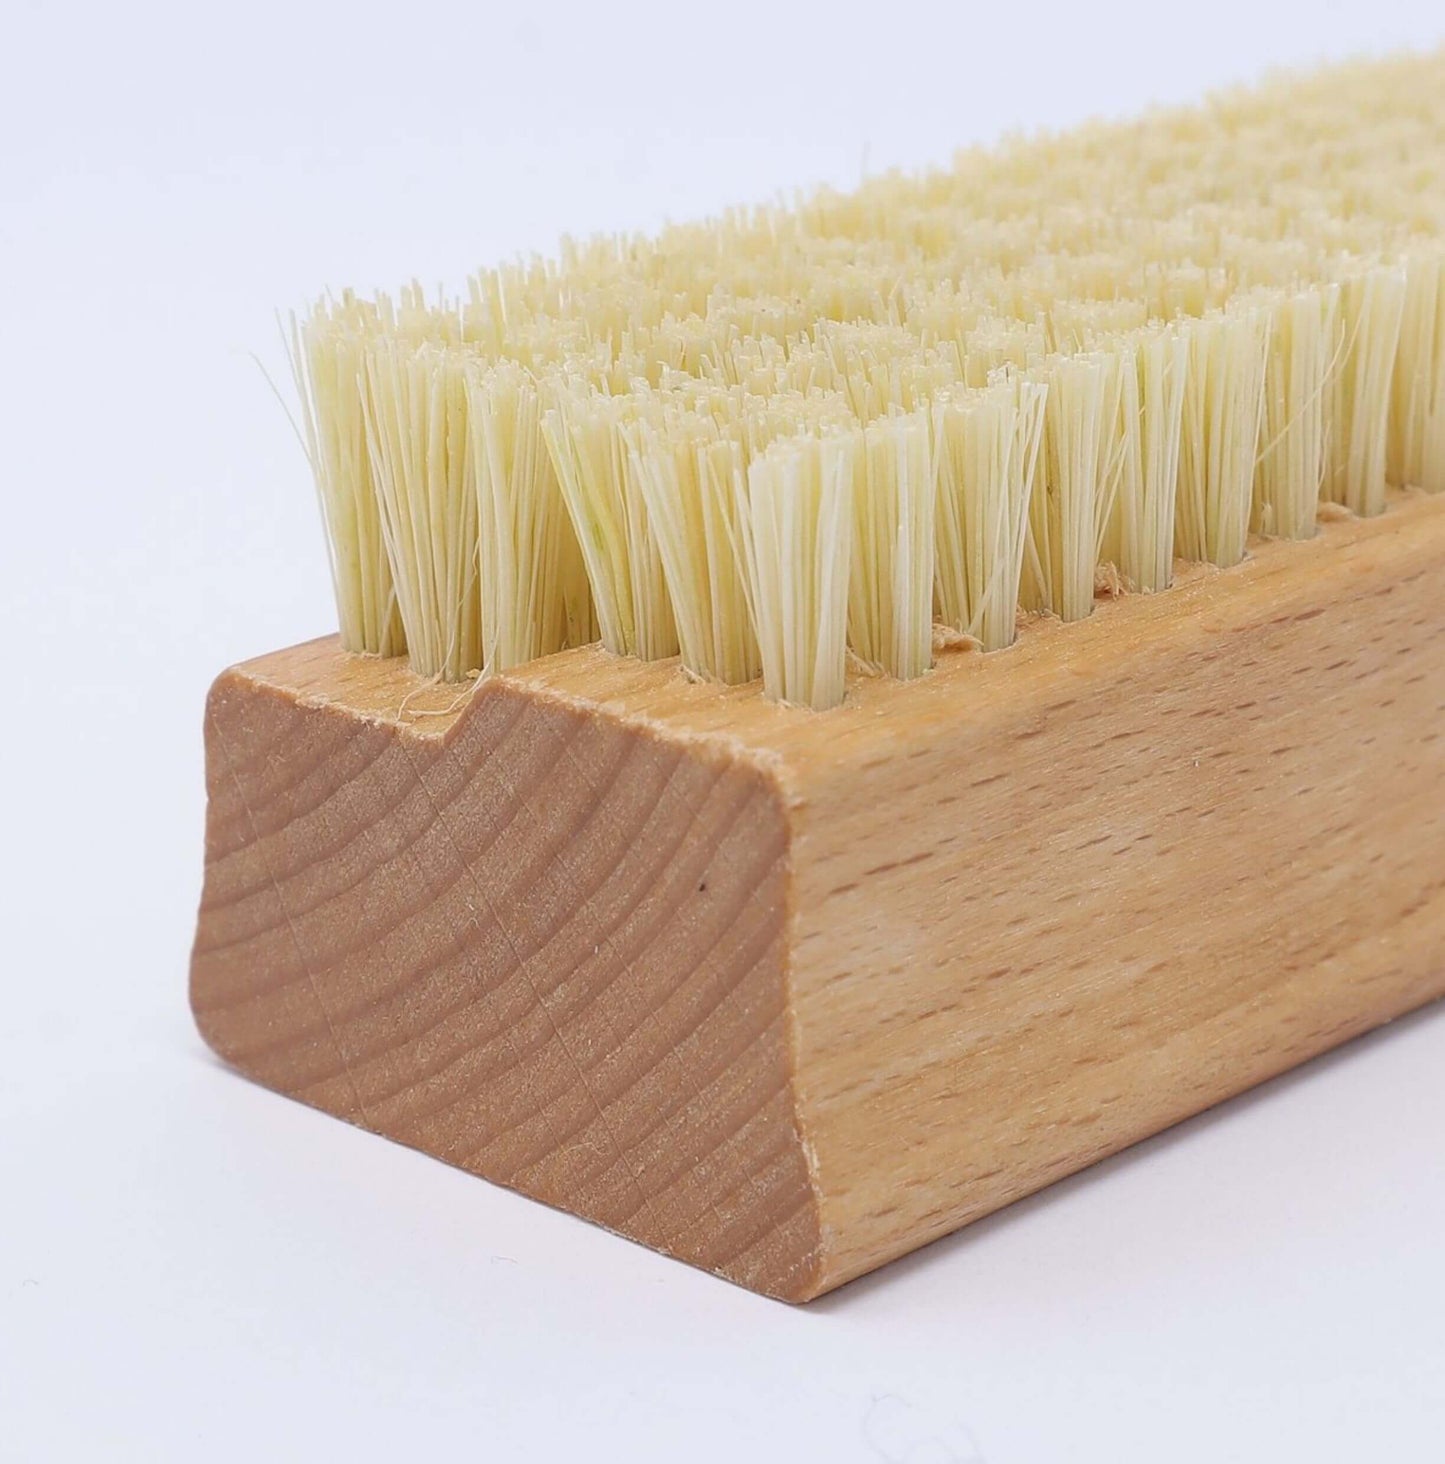 Nail brush 2-stage oiled beech wood - Unik by Nature